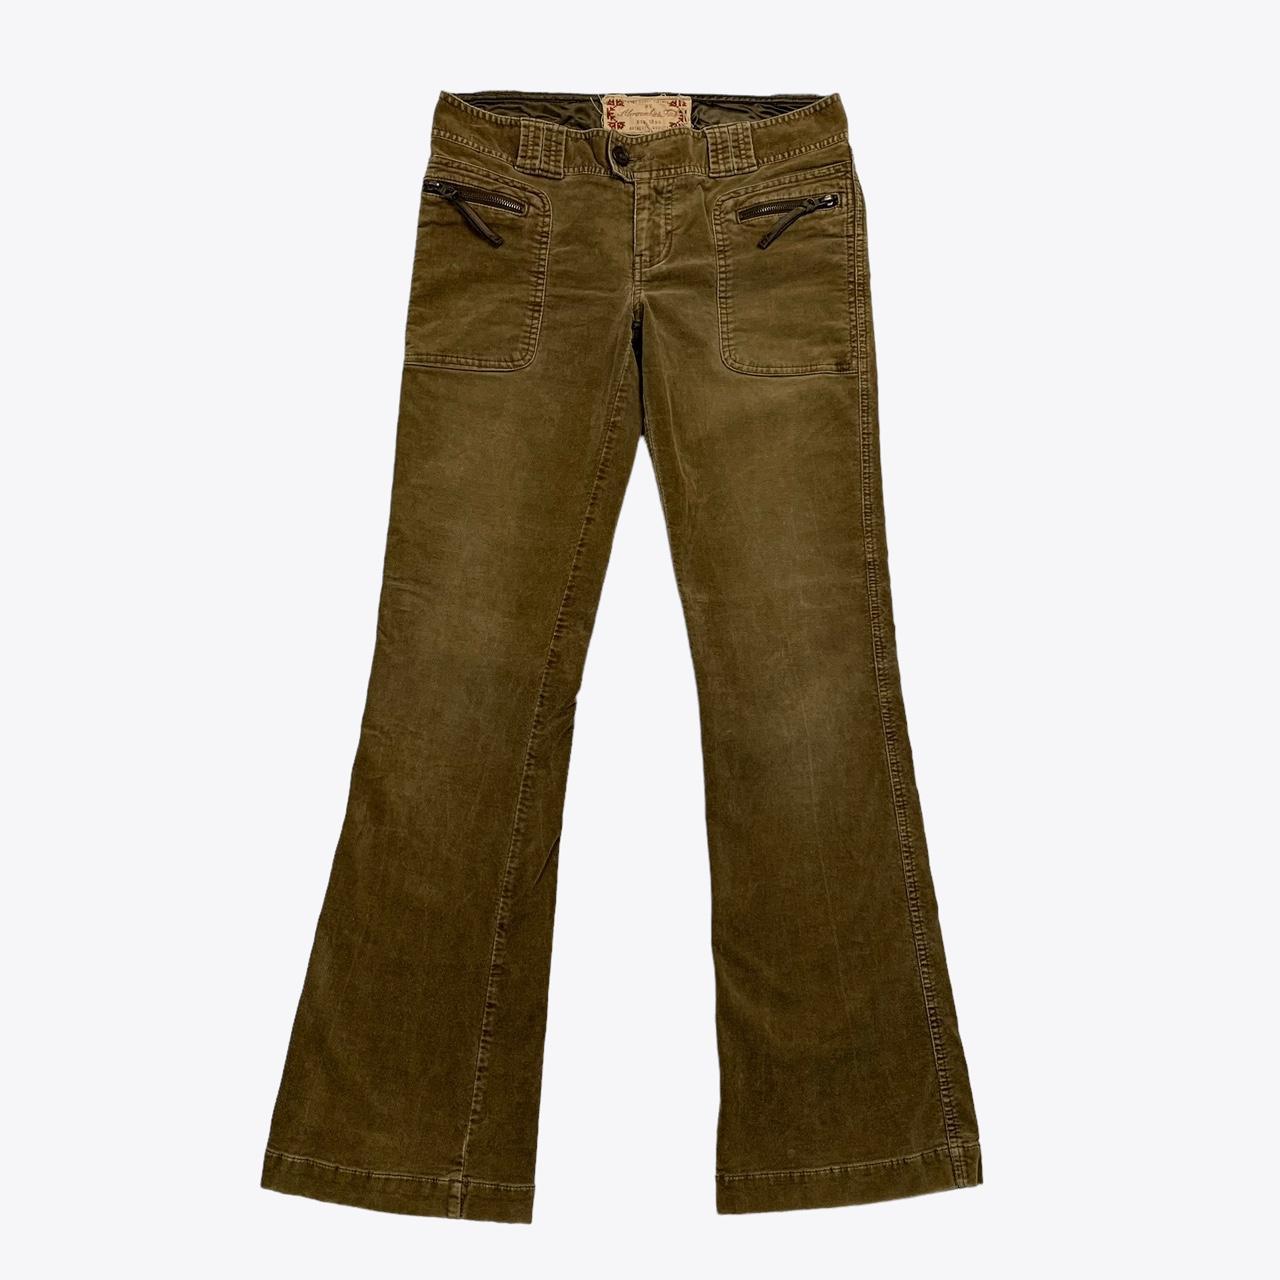 Abercrombie & Fitch Low Rise Flare Pants , Front and